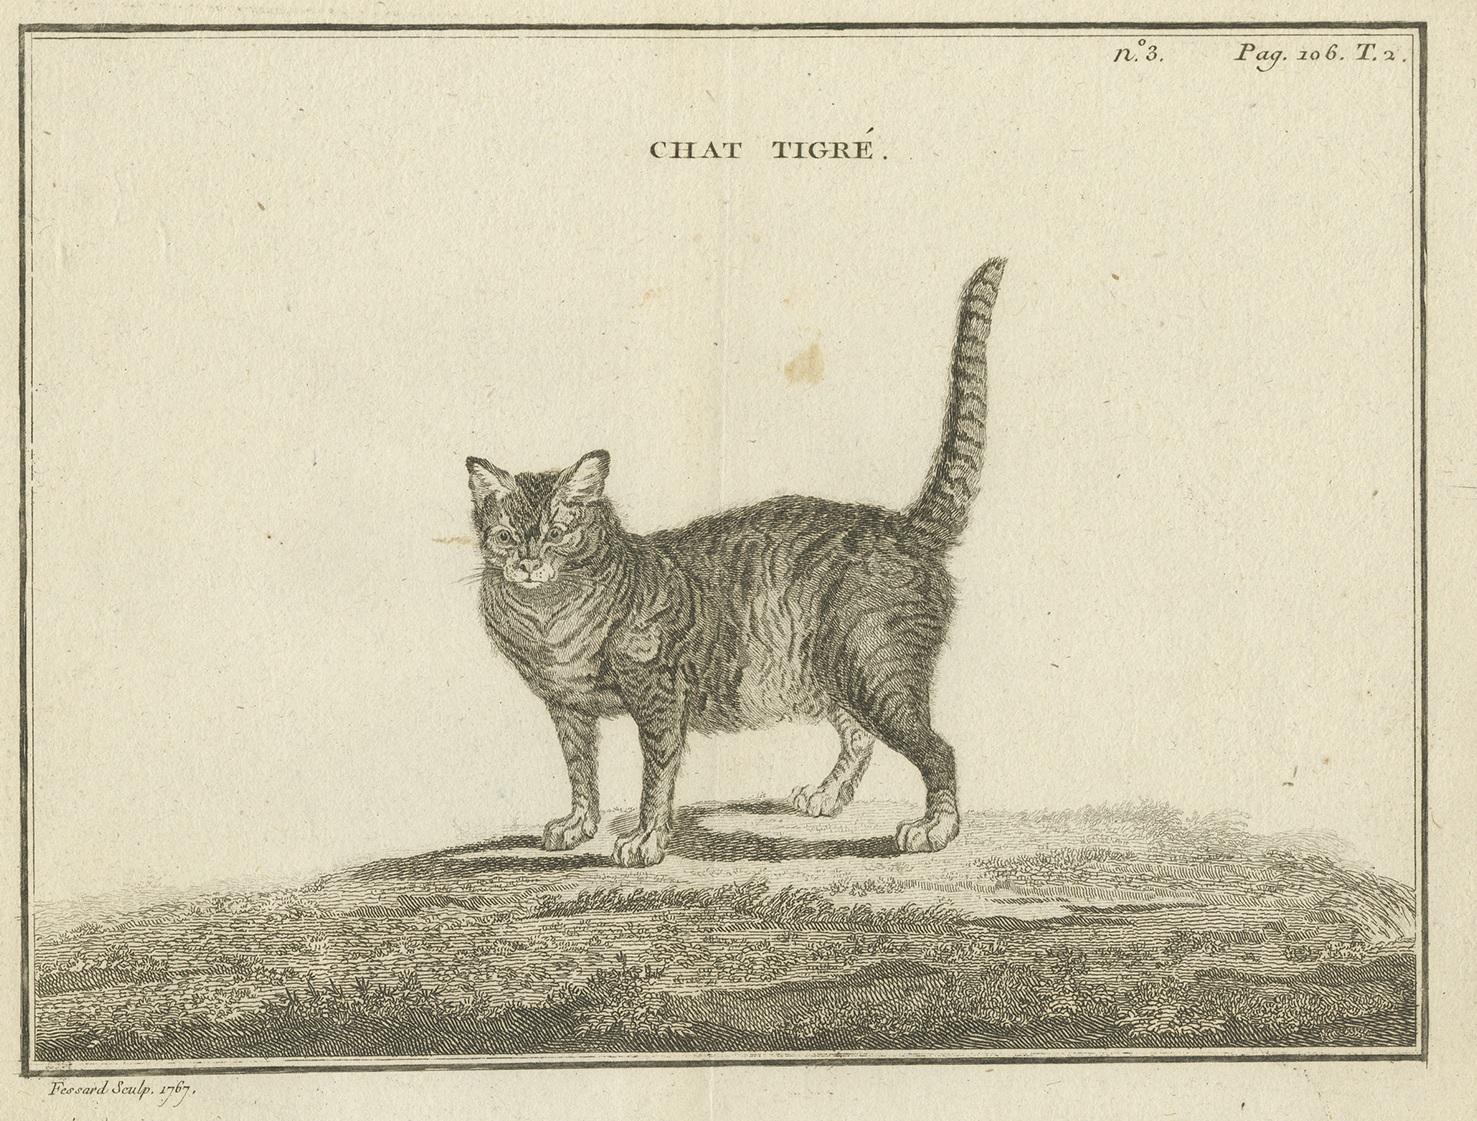 Antique print titled 'Chat Tigré'. Copper engraving of an Oncilla. The oncilla (Leopardus tigrinus), also known as the northern tiger cat, little spotted cat, and tigrillo, is a small spotted cat ranging from Central America to central Brazil. This